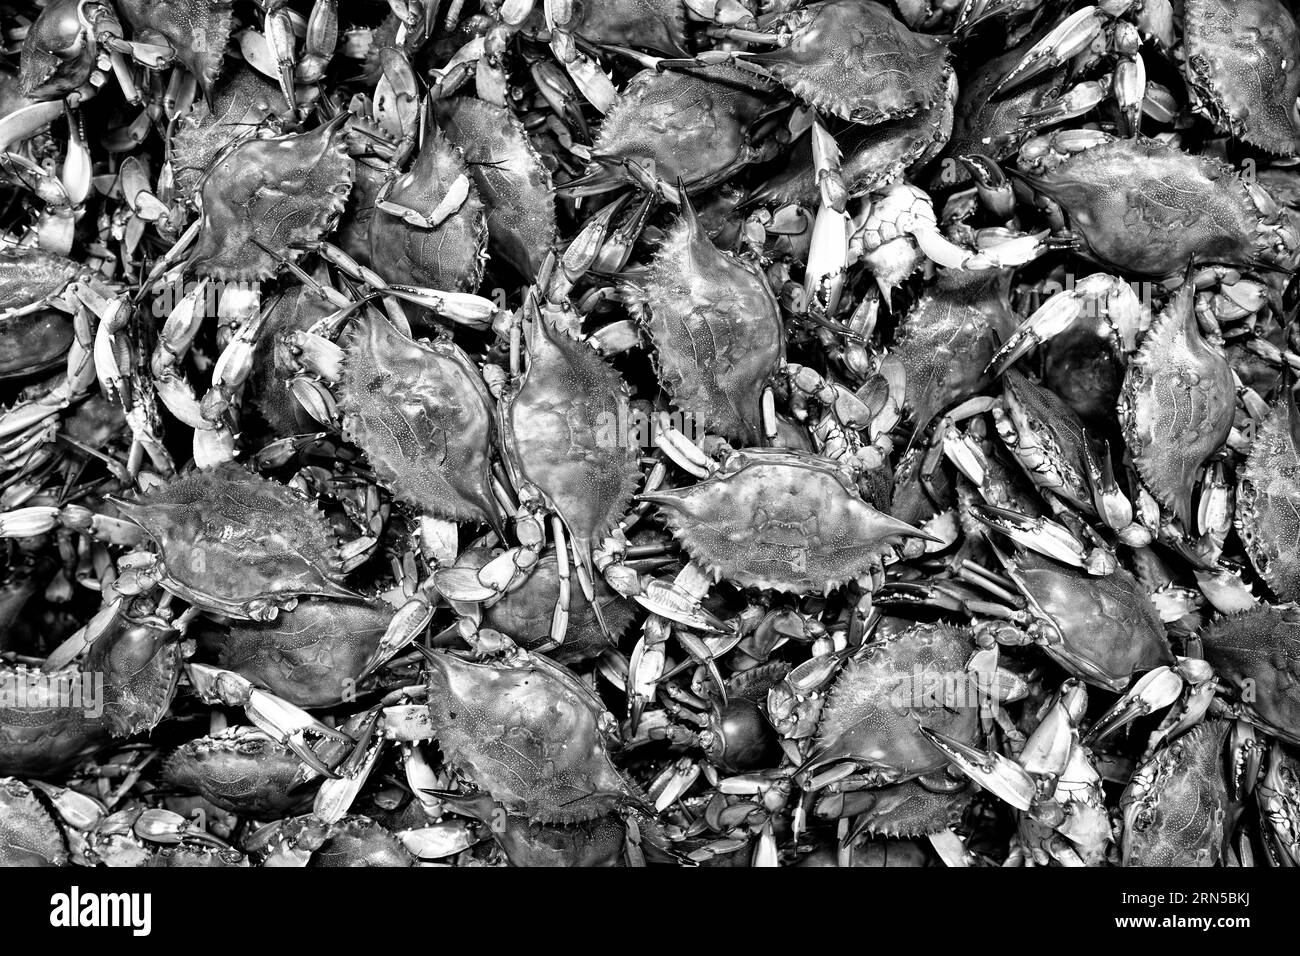 Chesapeake Bay, MD - Blue crabs (Callinectes sapidus) are a local specialty and delicacy of the mid-Atlantic region of the United States, especially t Stock Photo